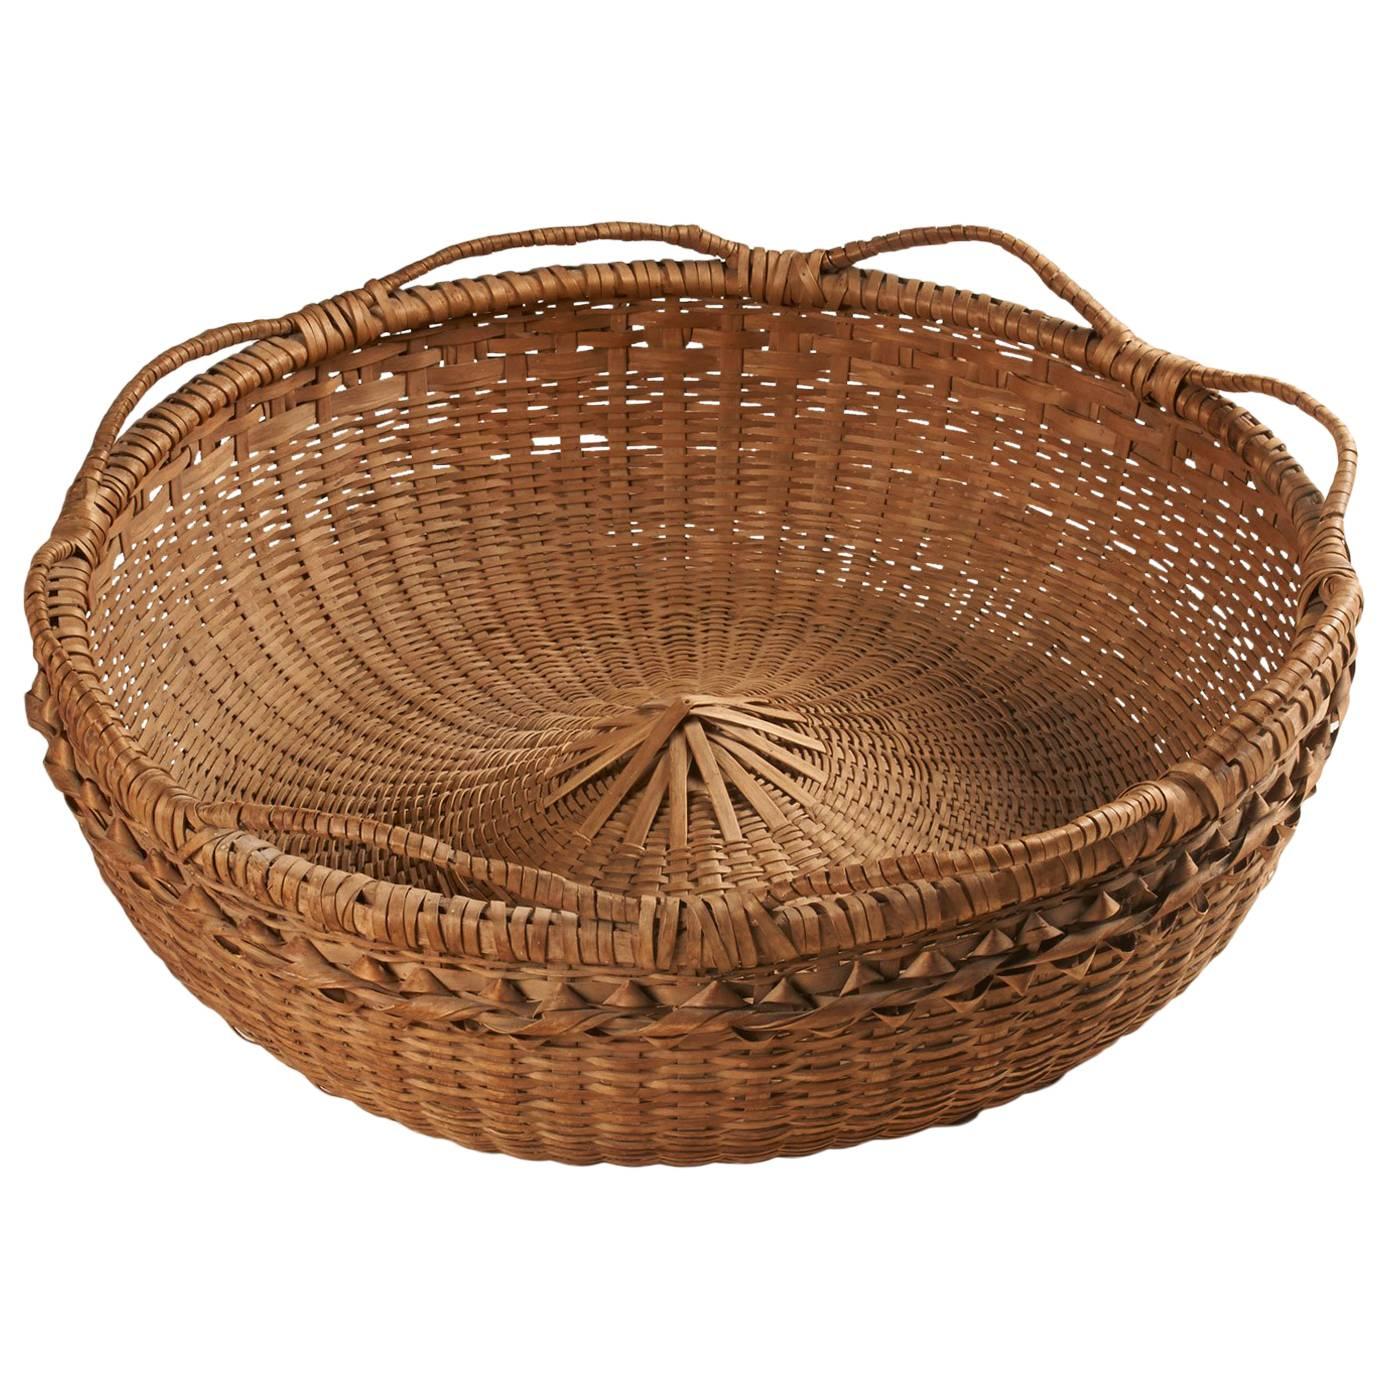 Large Native American Round Splint Basket with Open-Coiled Handles